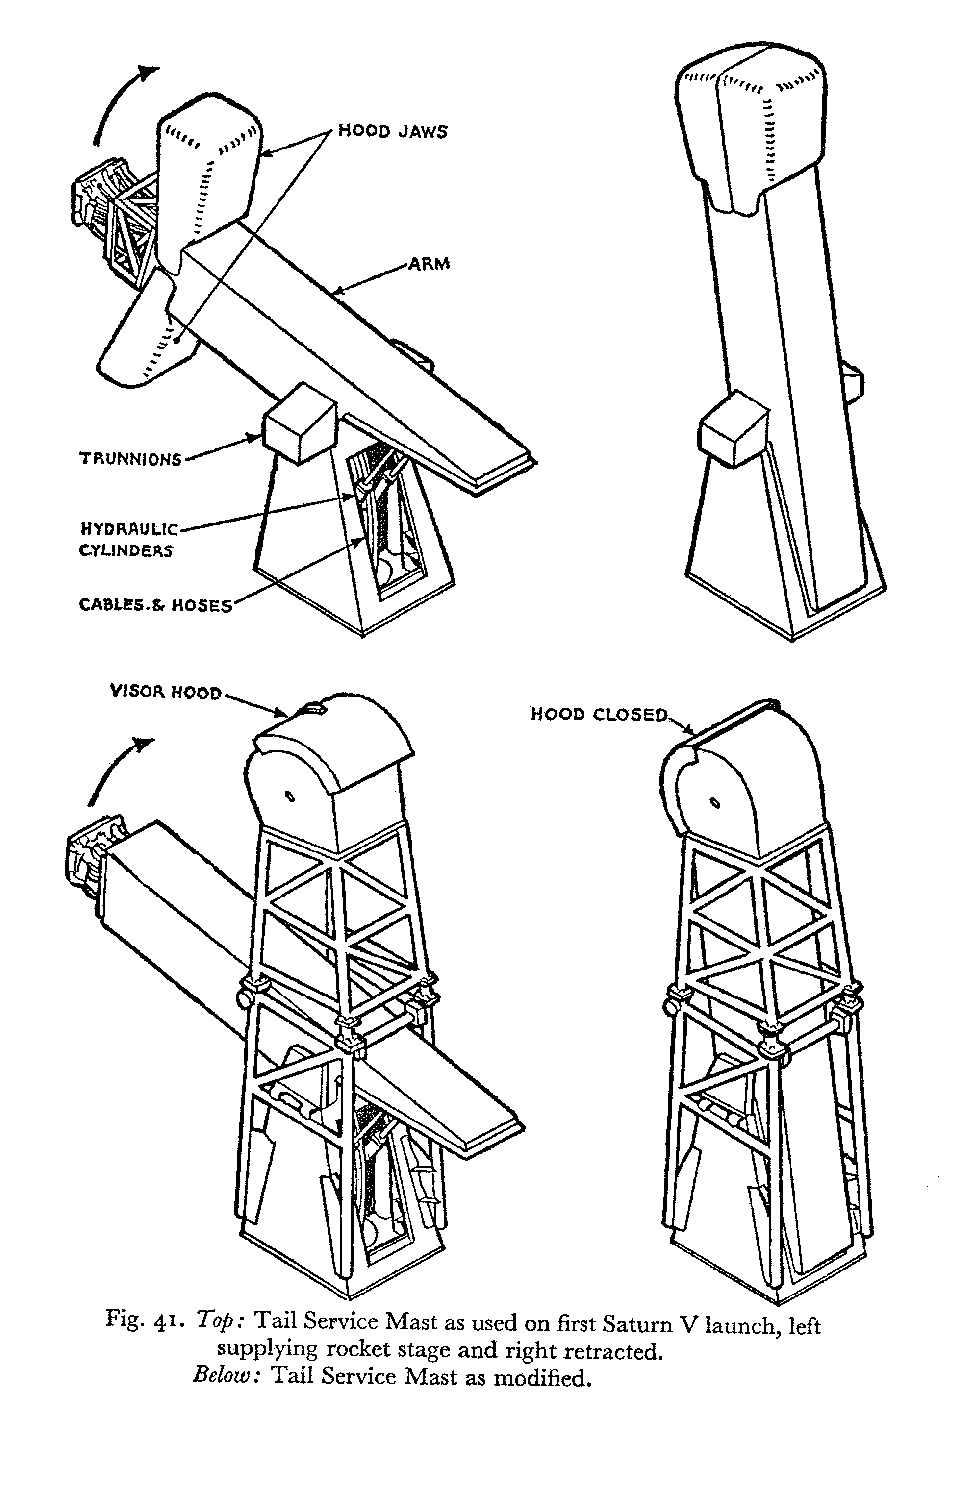 Tail Service Masts